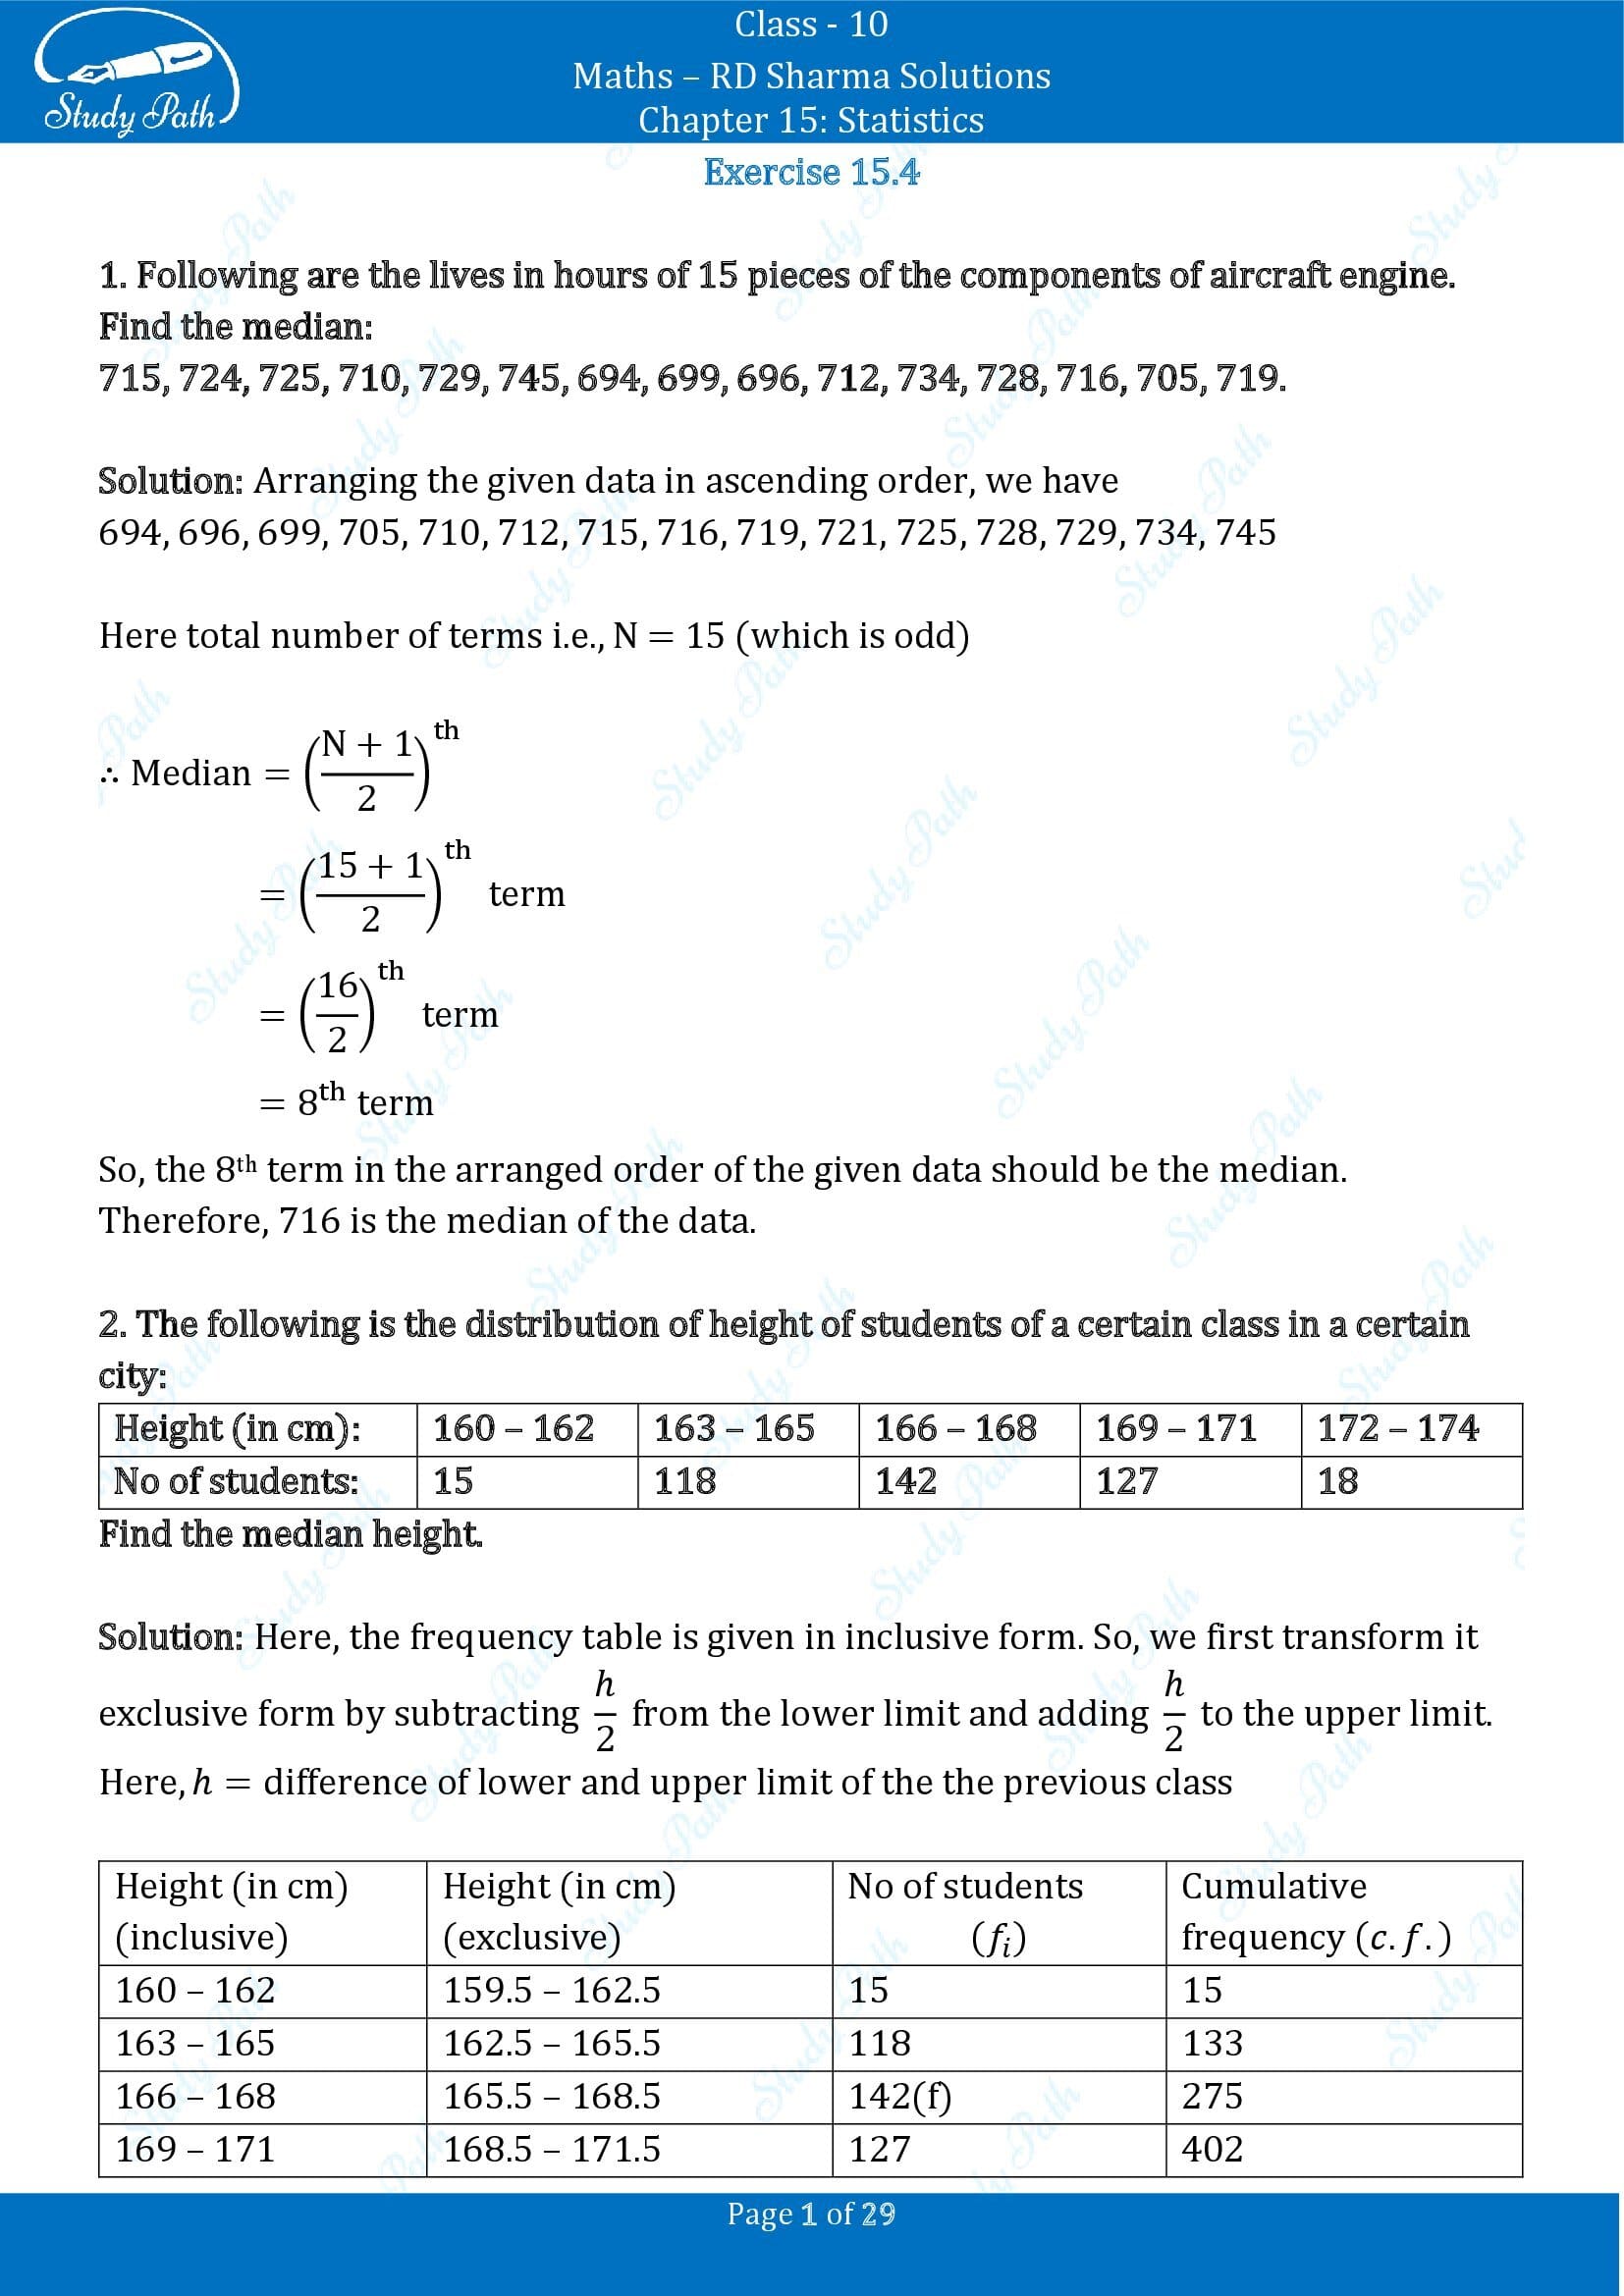 RD Sharma Solutions Class 10 Chapter 15 Statistics Exercise 15.4 00001